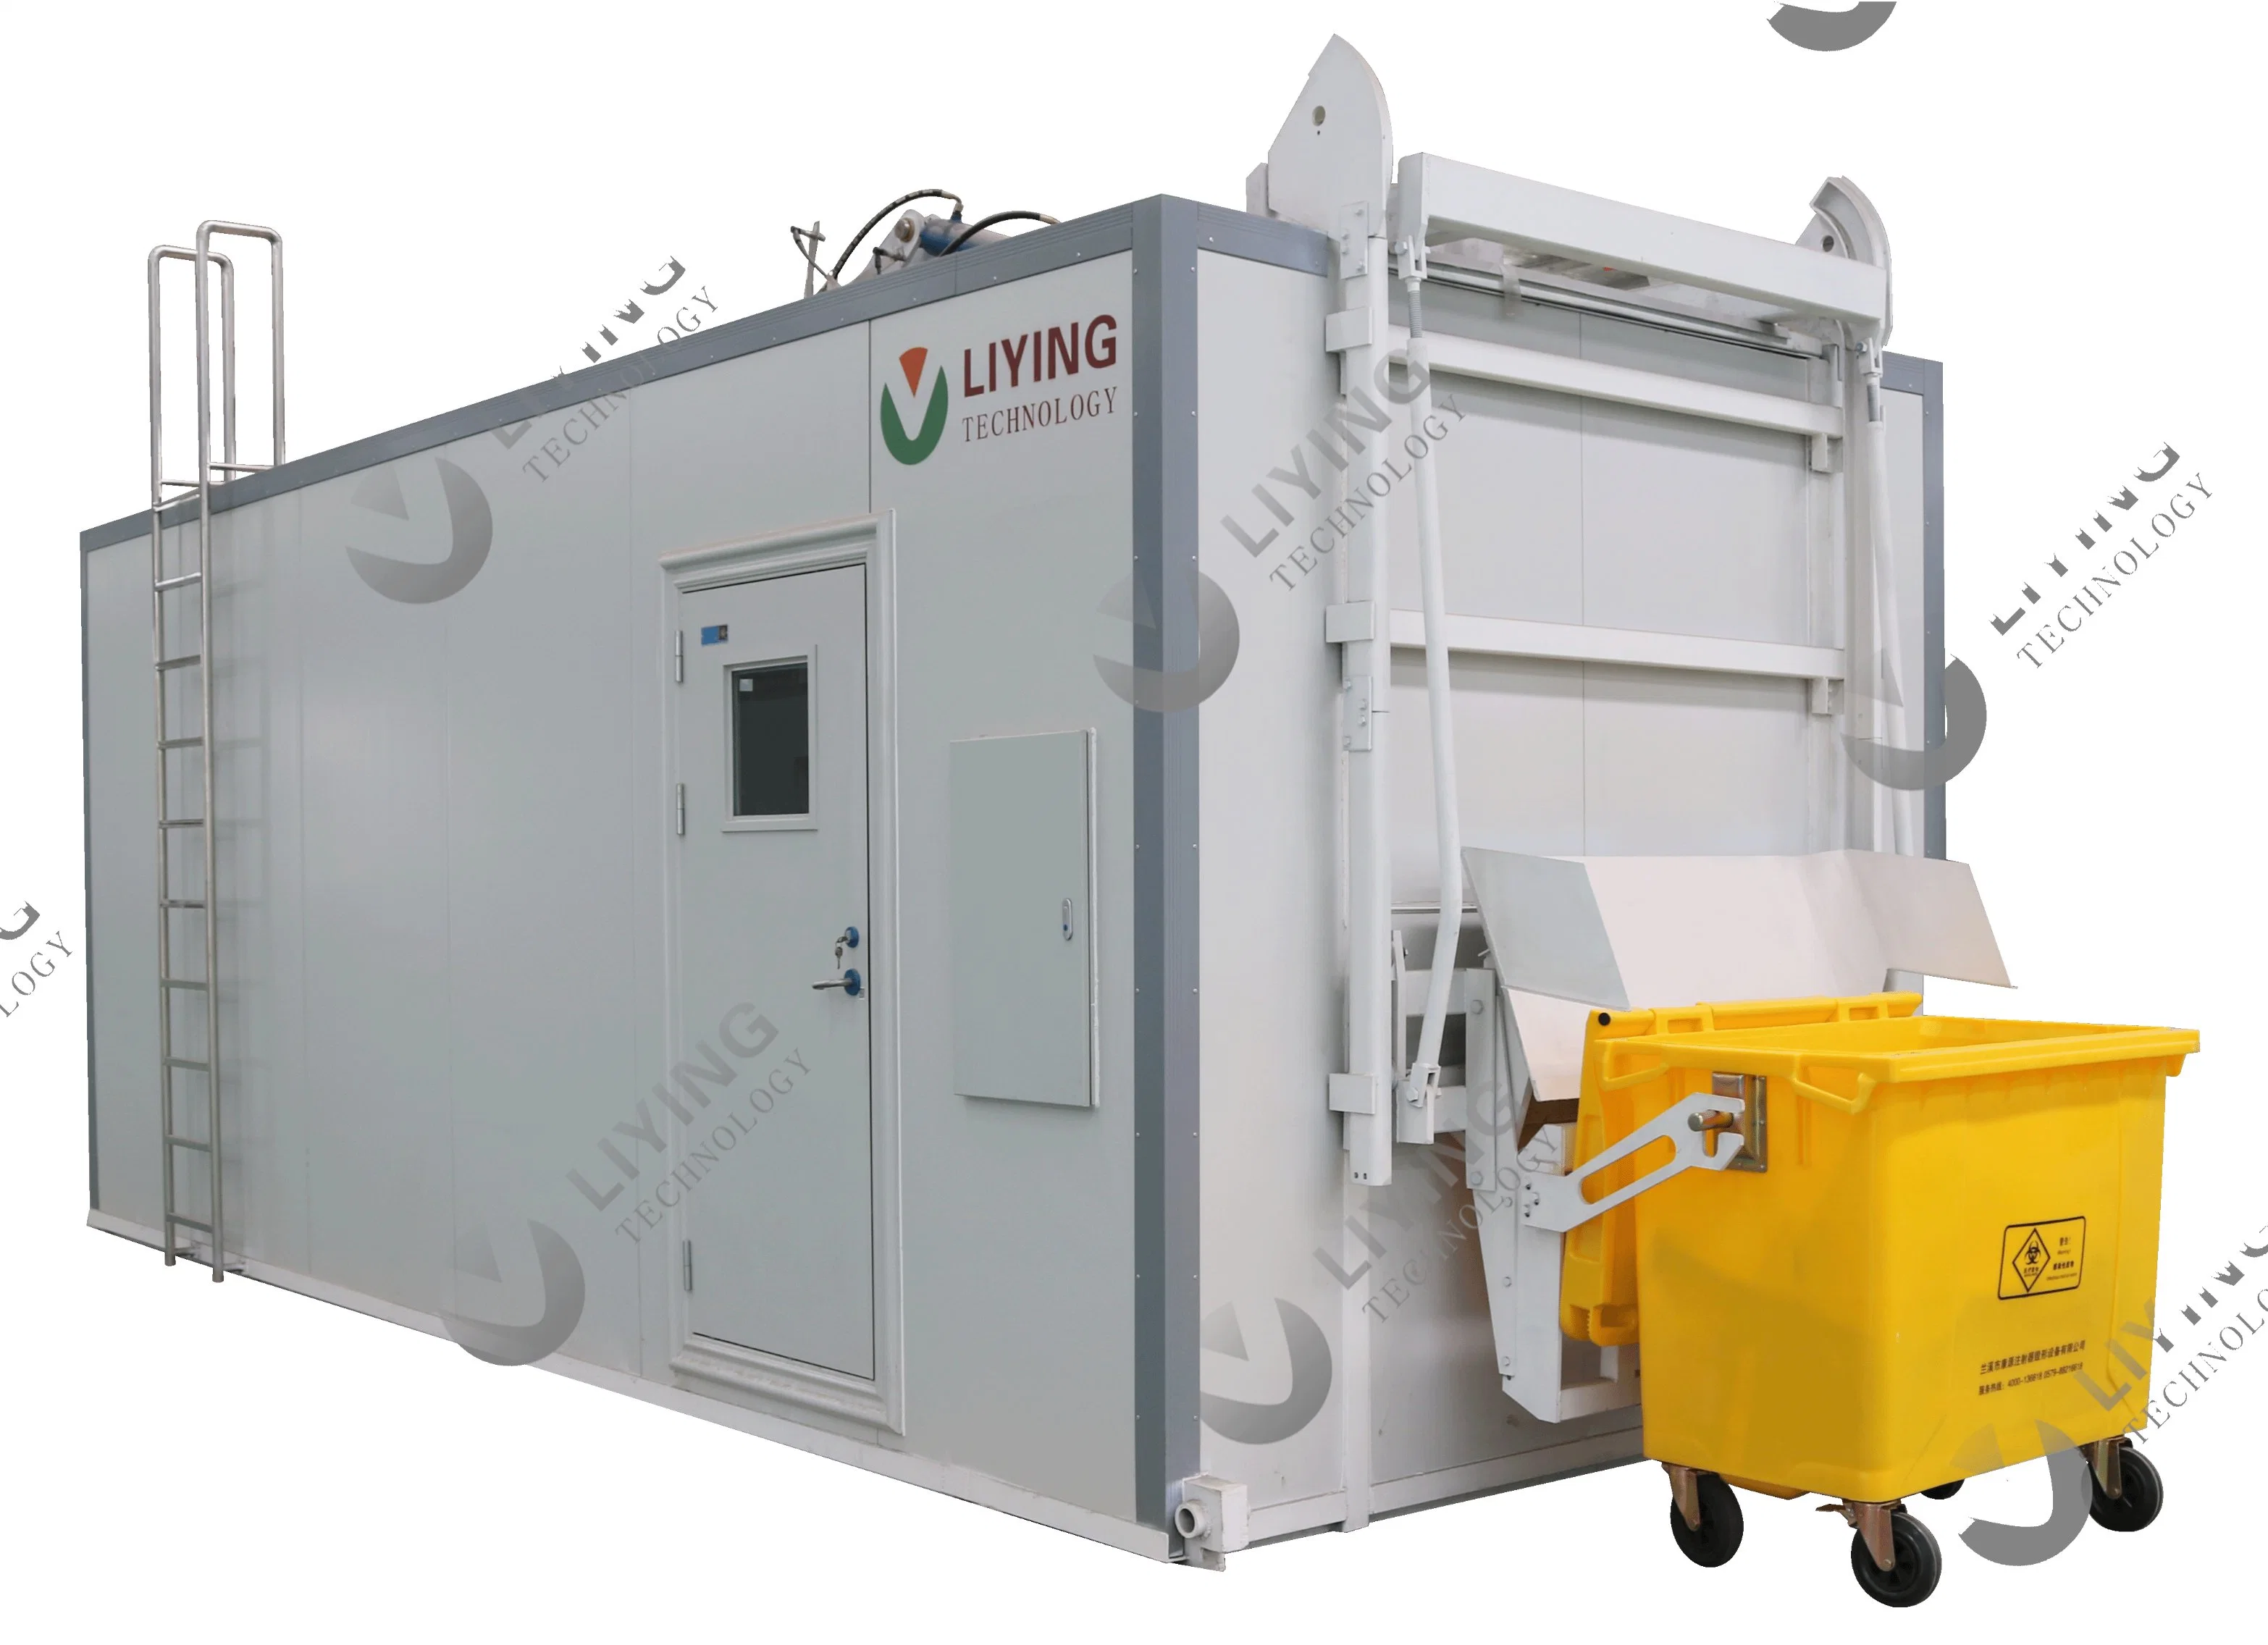 Fully Automatic Hospital Clinic Medical Waste Microwave Disinfection Treatment Disposal Machine with Automatic Processing Shredding System Equipment Management